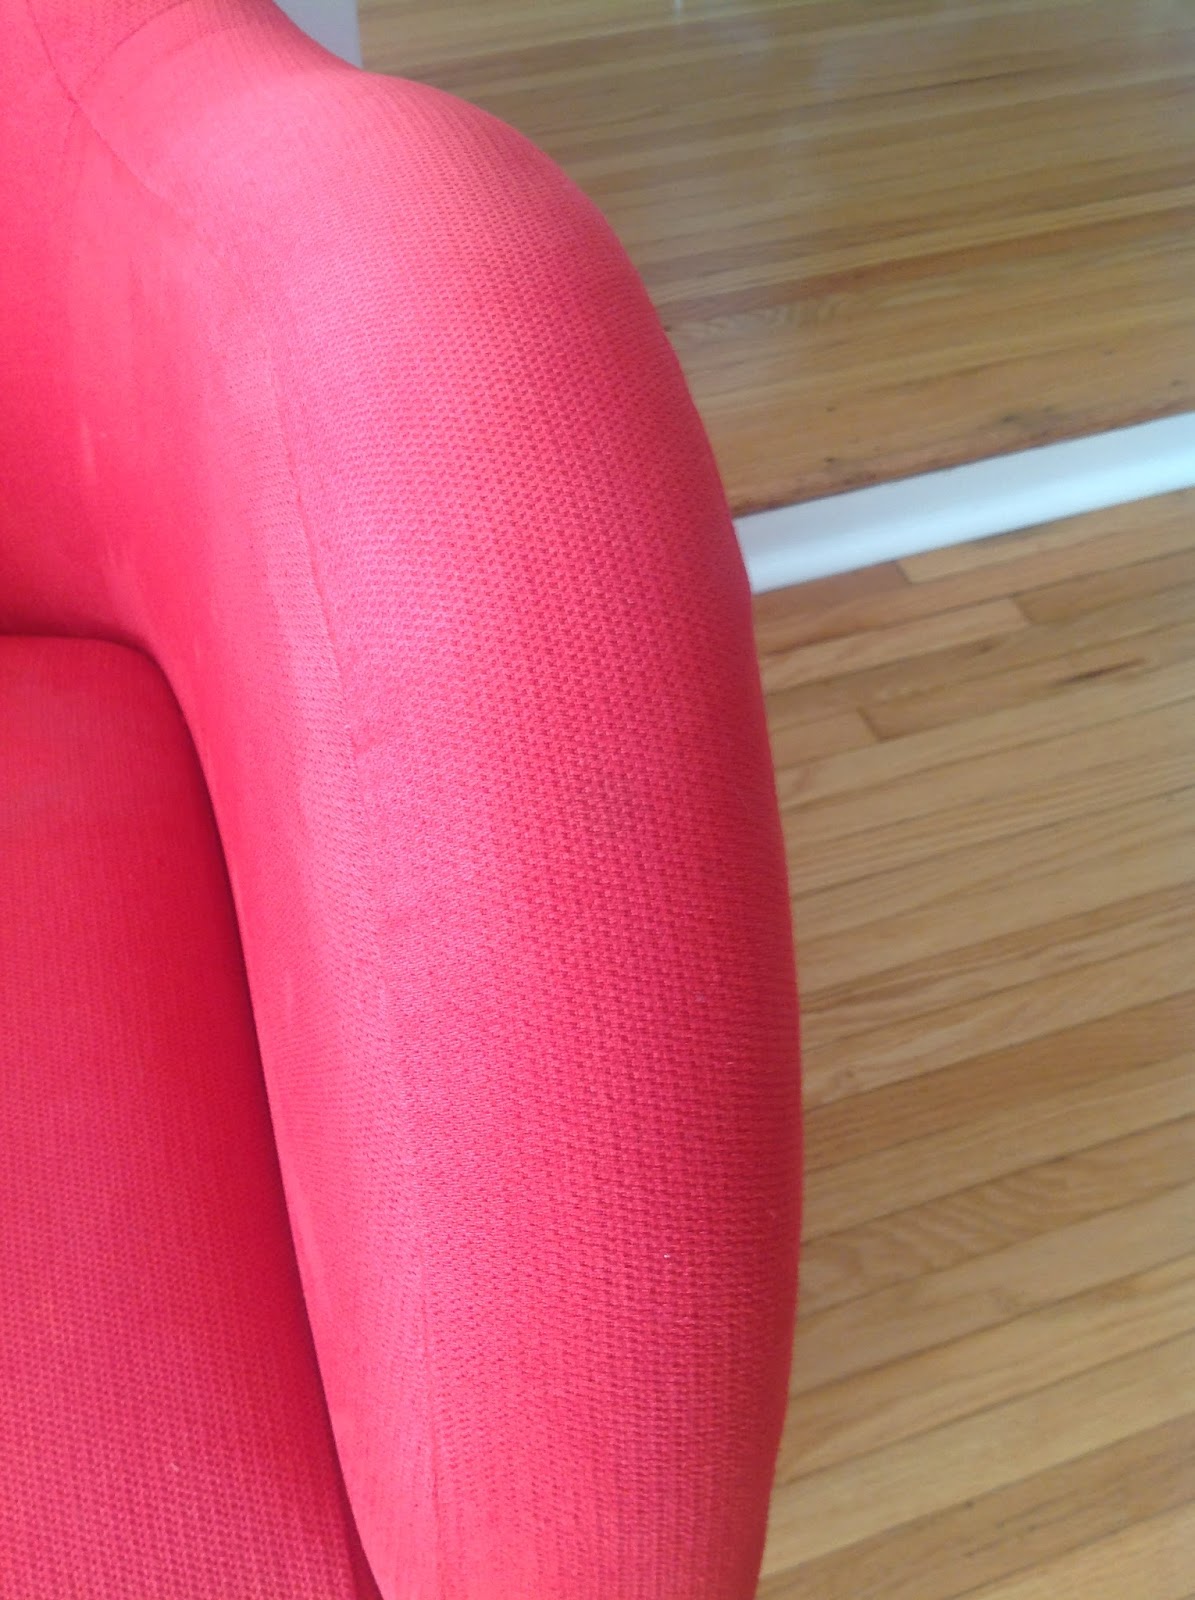 How To Dye an Upholstered Chair – Rit Dye